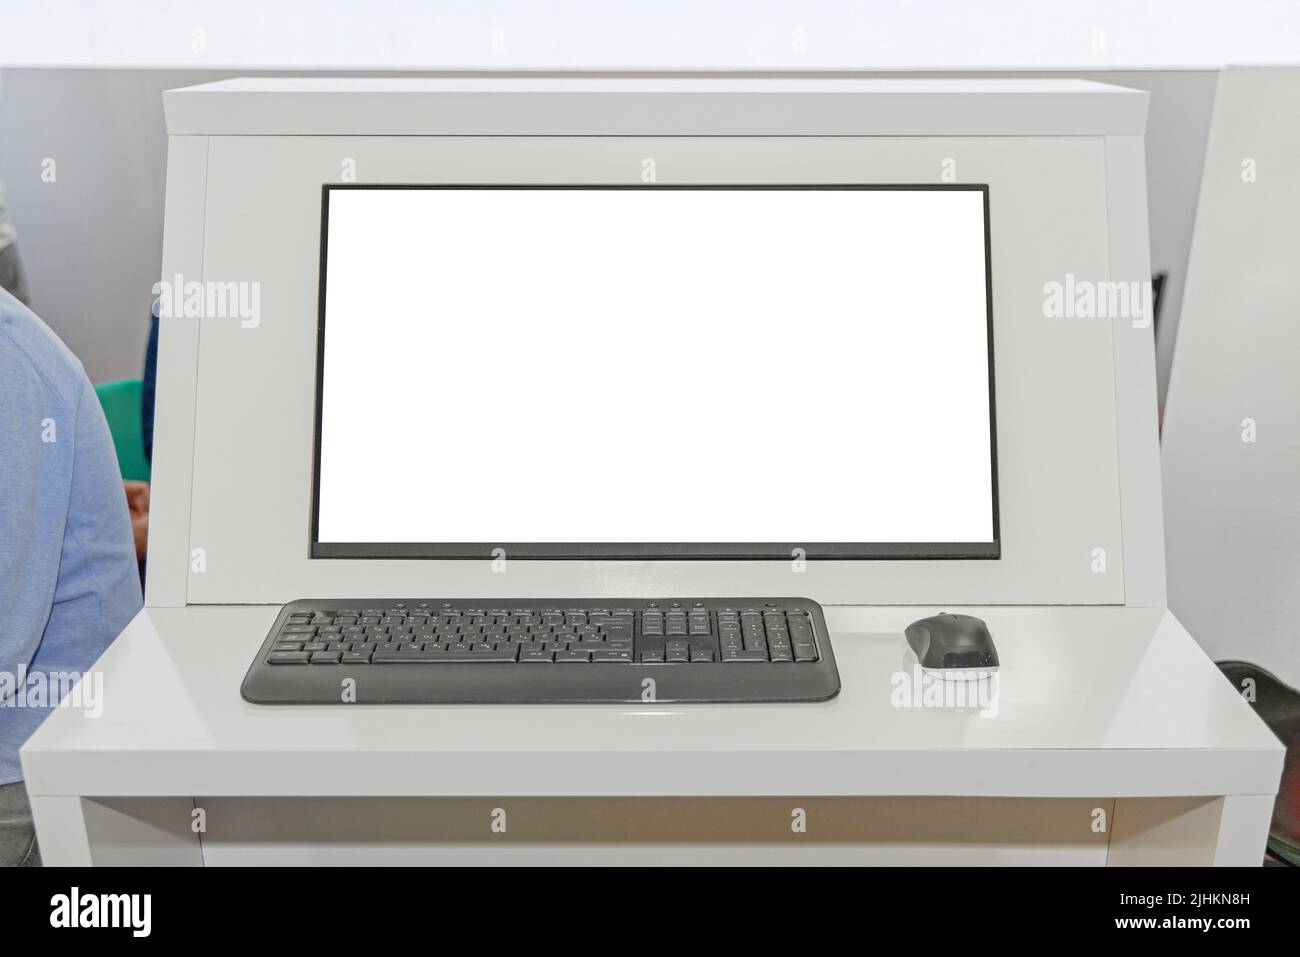 Big Screen Keyboard and Mouse Computer Information Terminal Desk Stock Photo